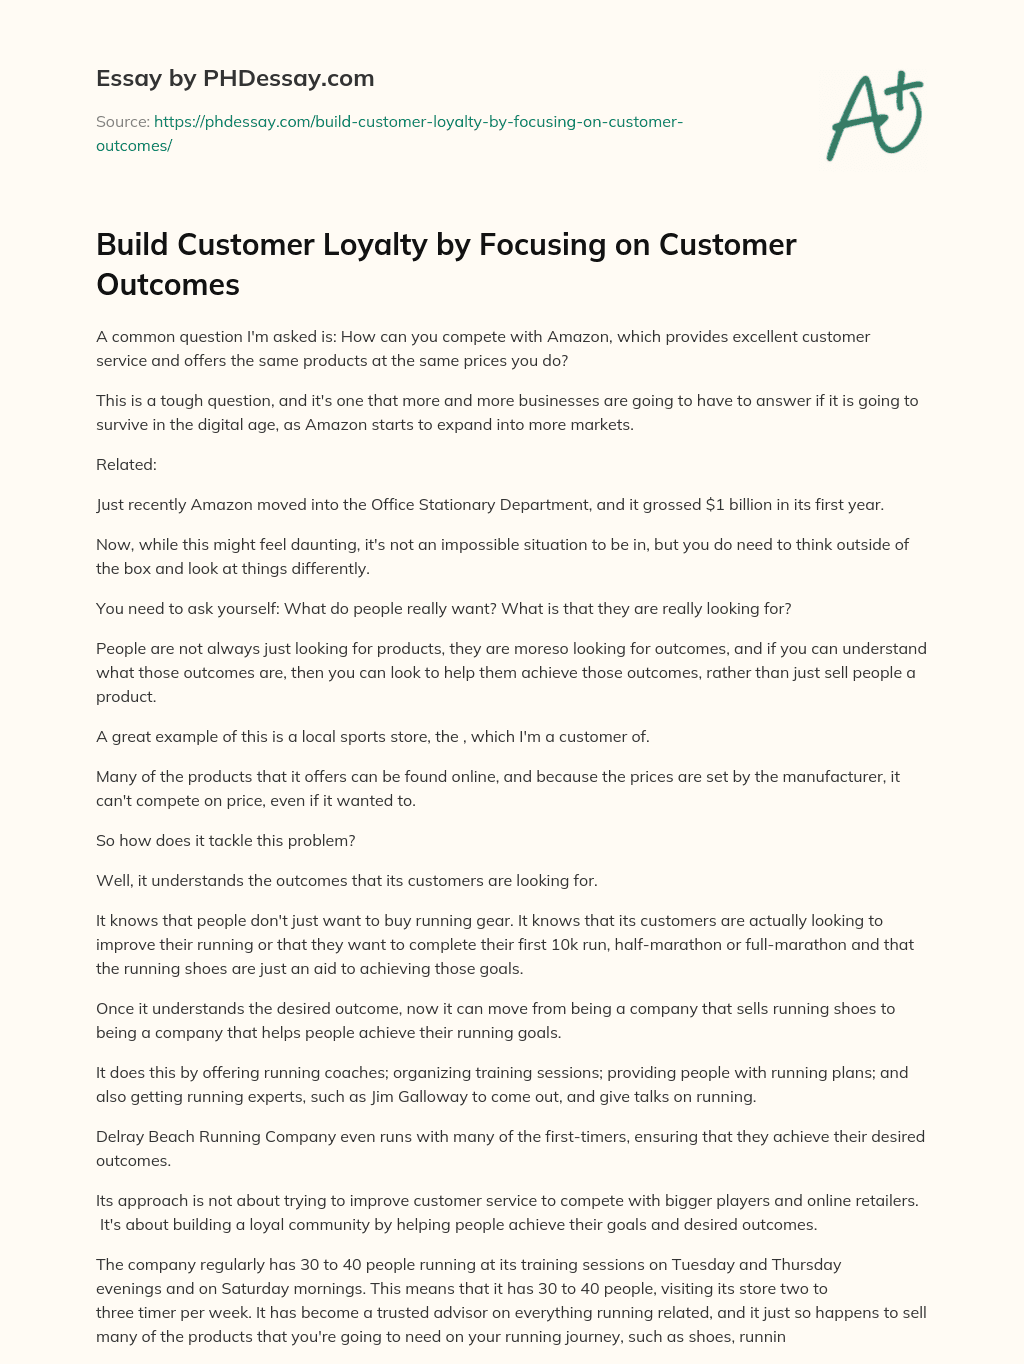 Build Customer Loyalty by Focusing on Customer Outcomes essay